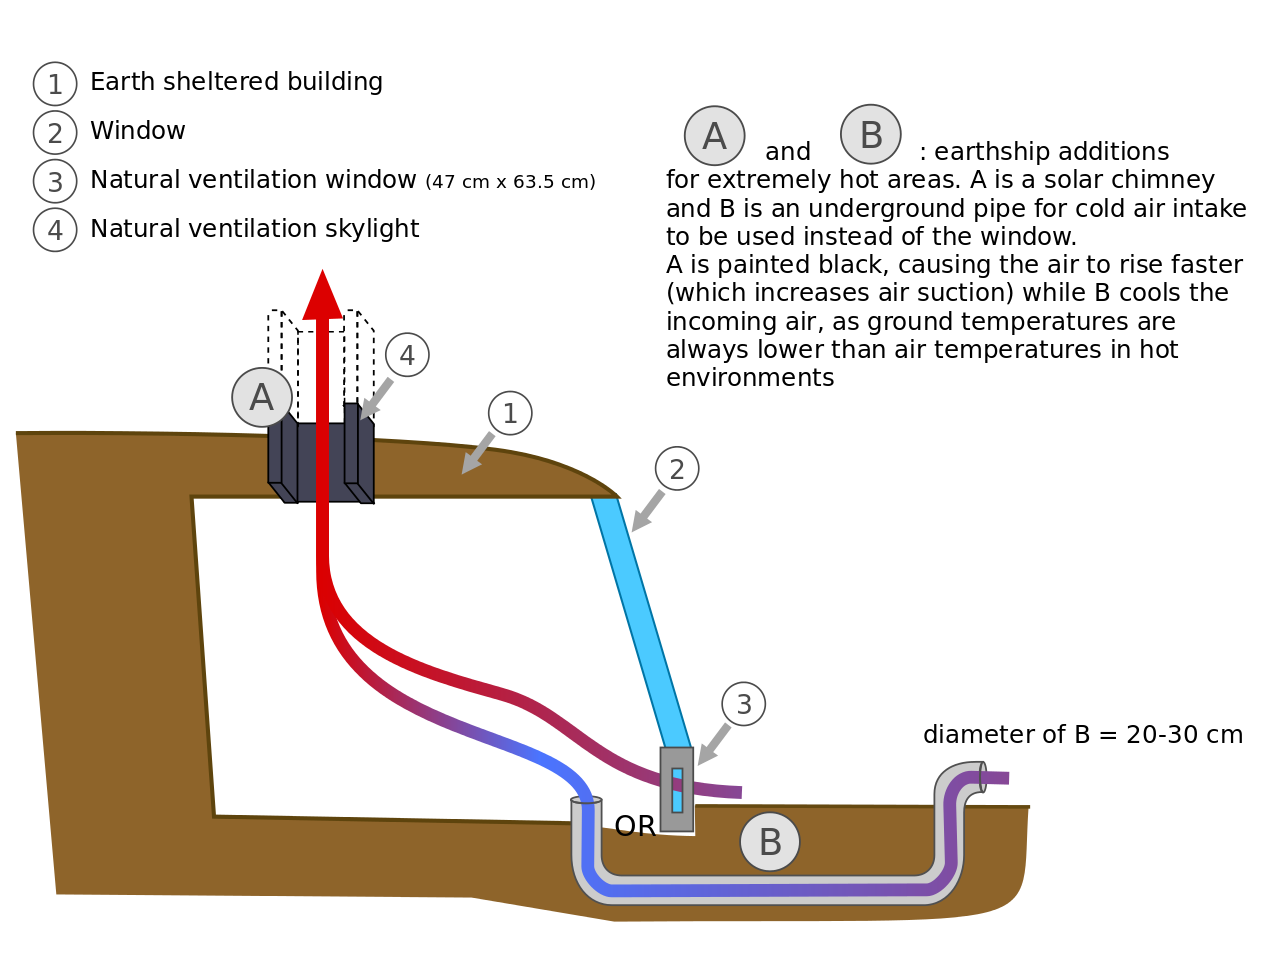 File:Earthship-ventilation-cooling-tube-schematic.svg ... wiring a four way switch diagram boiler 